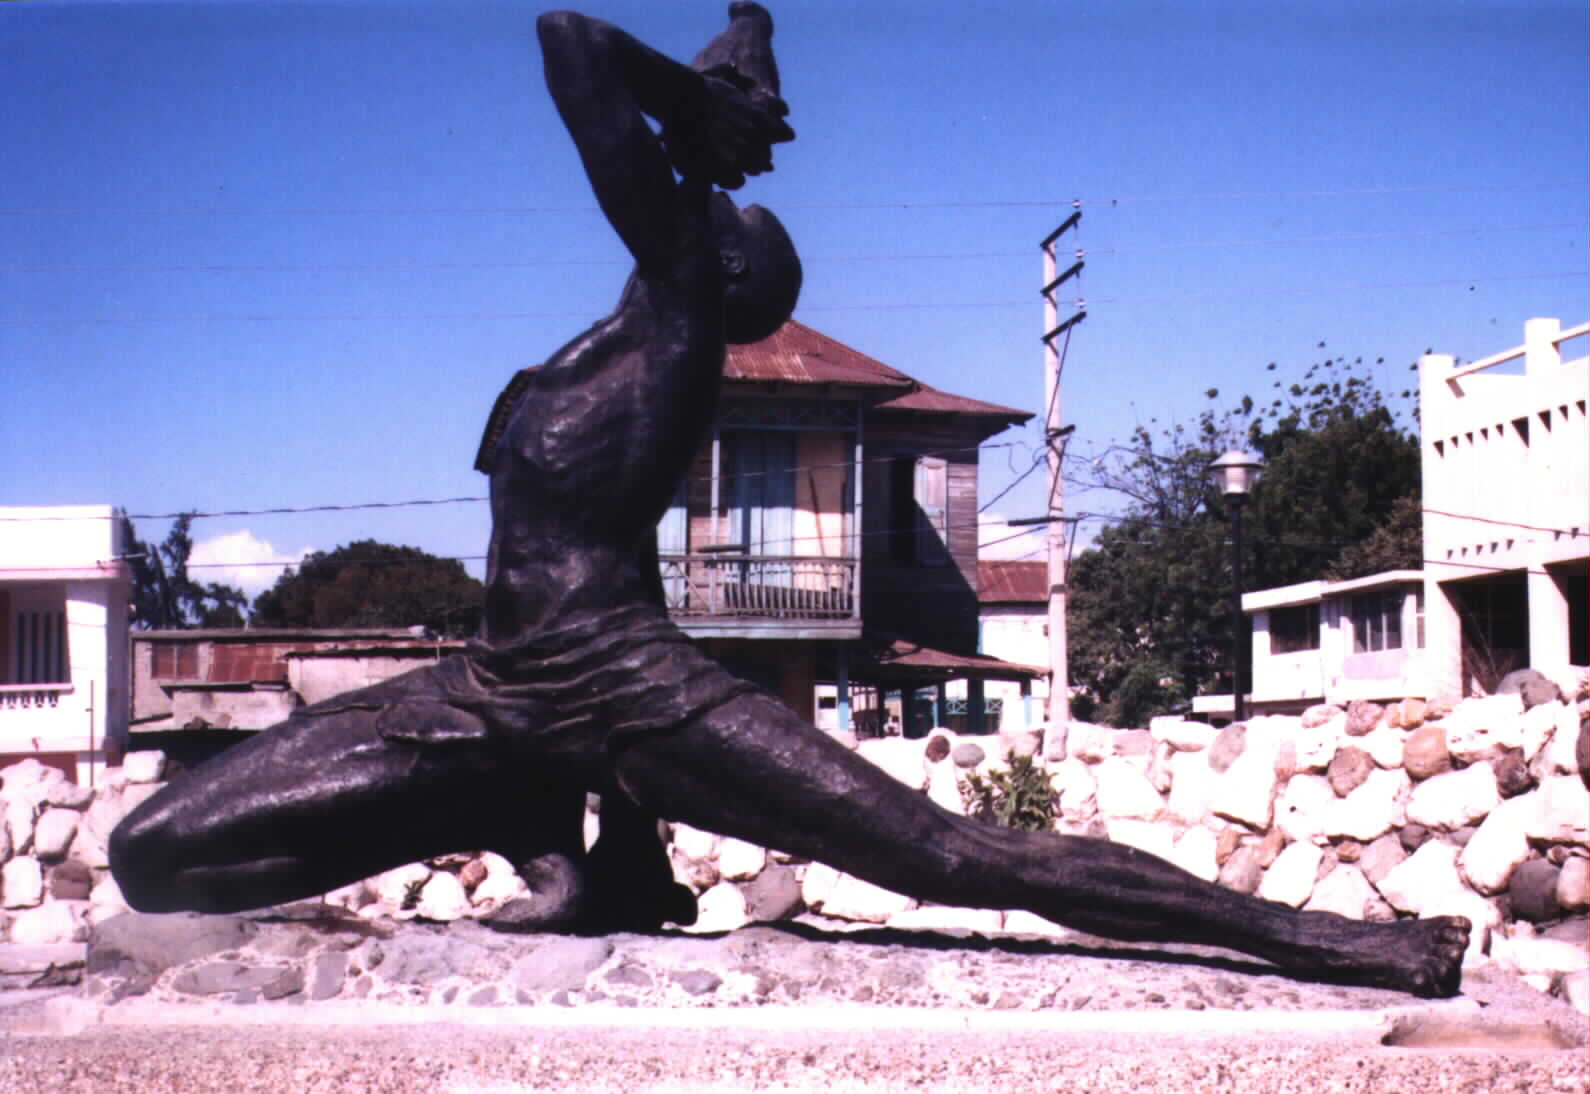 (Photographed by Noe Dorestant 1/28/2001:

Statue of Haitian fighthers using the conch shell to make the rallying call for

freedom.)Picture photographed on 1/28/2001 and provided by Noe Dorestant,

if you copy for reuse, give credit where credit is due. 